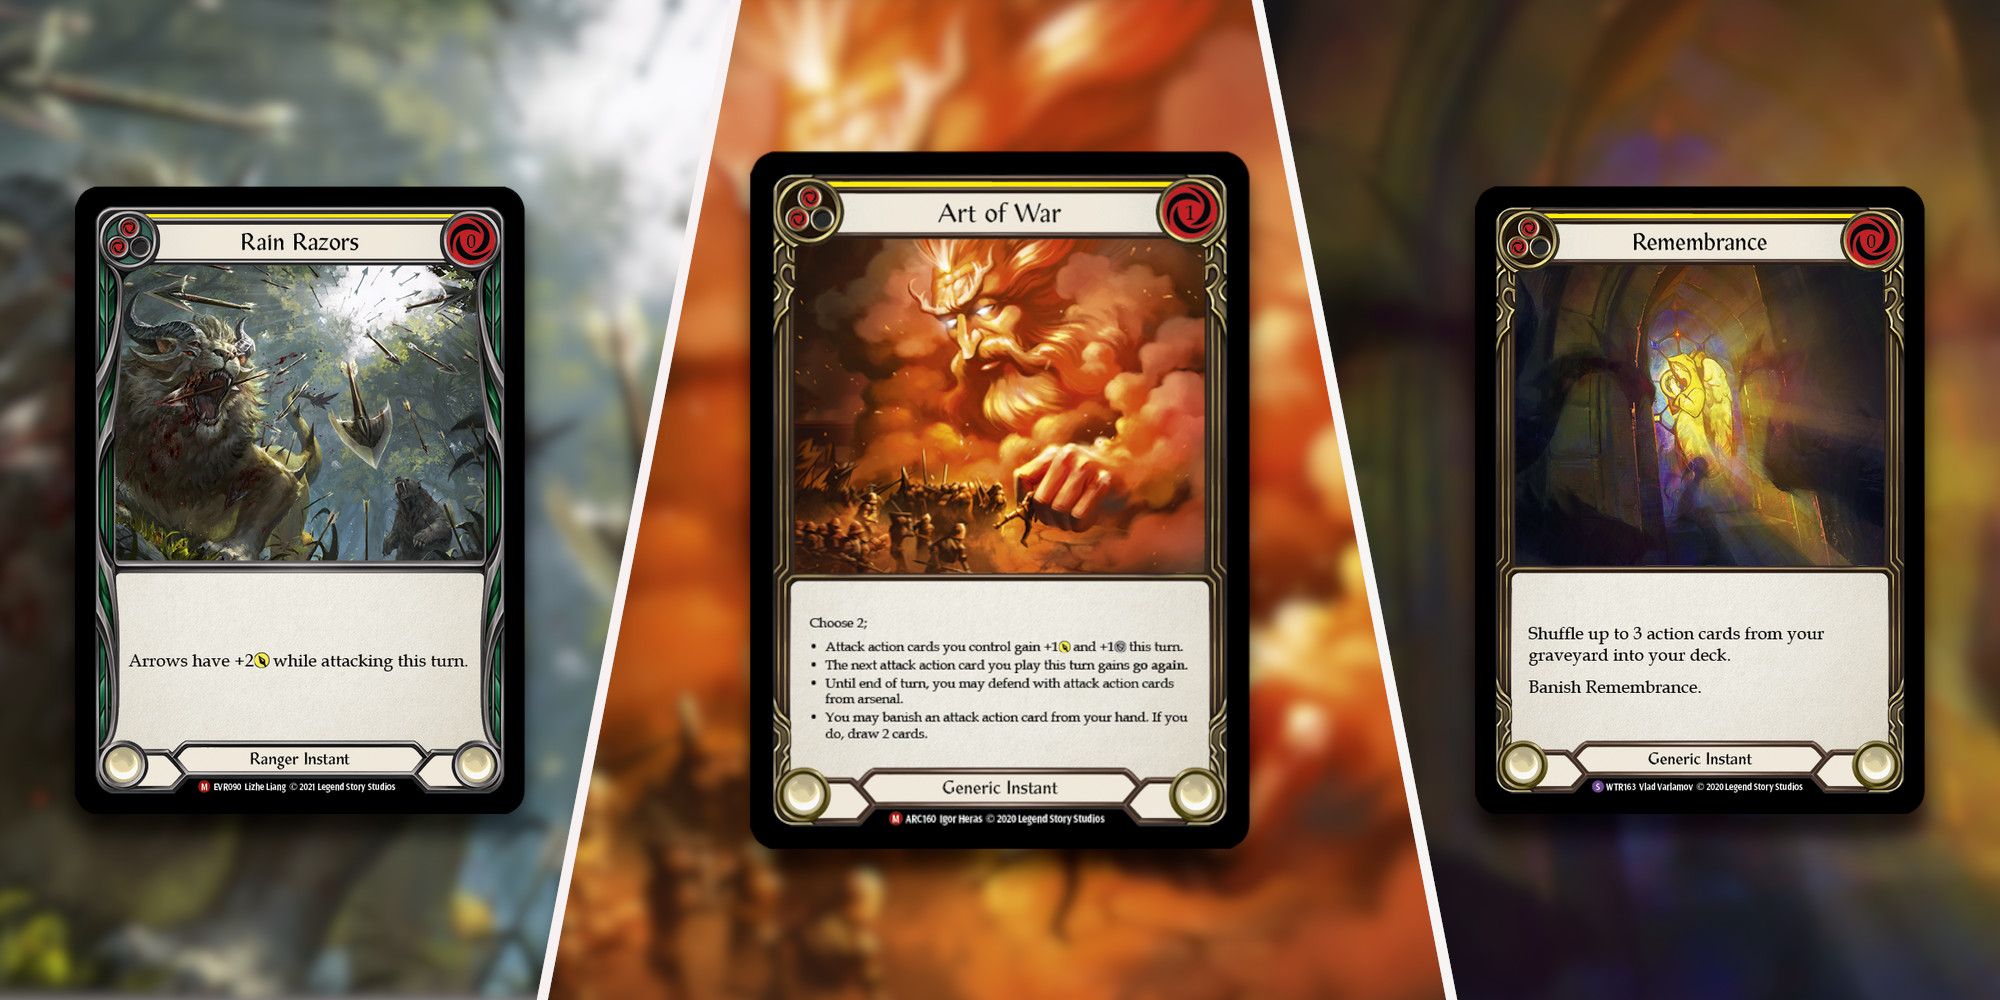 Rain Razors, Art of War, and Remembrance from Flesh and Blood TCG